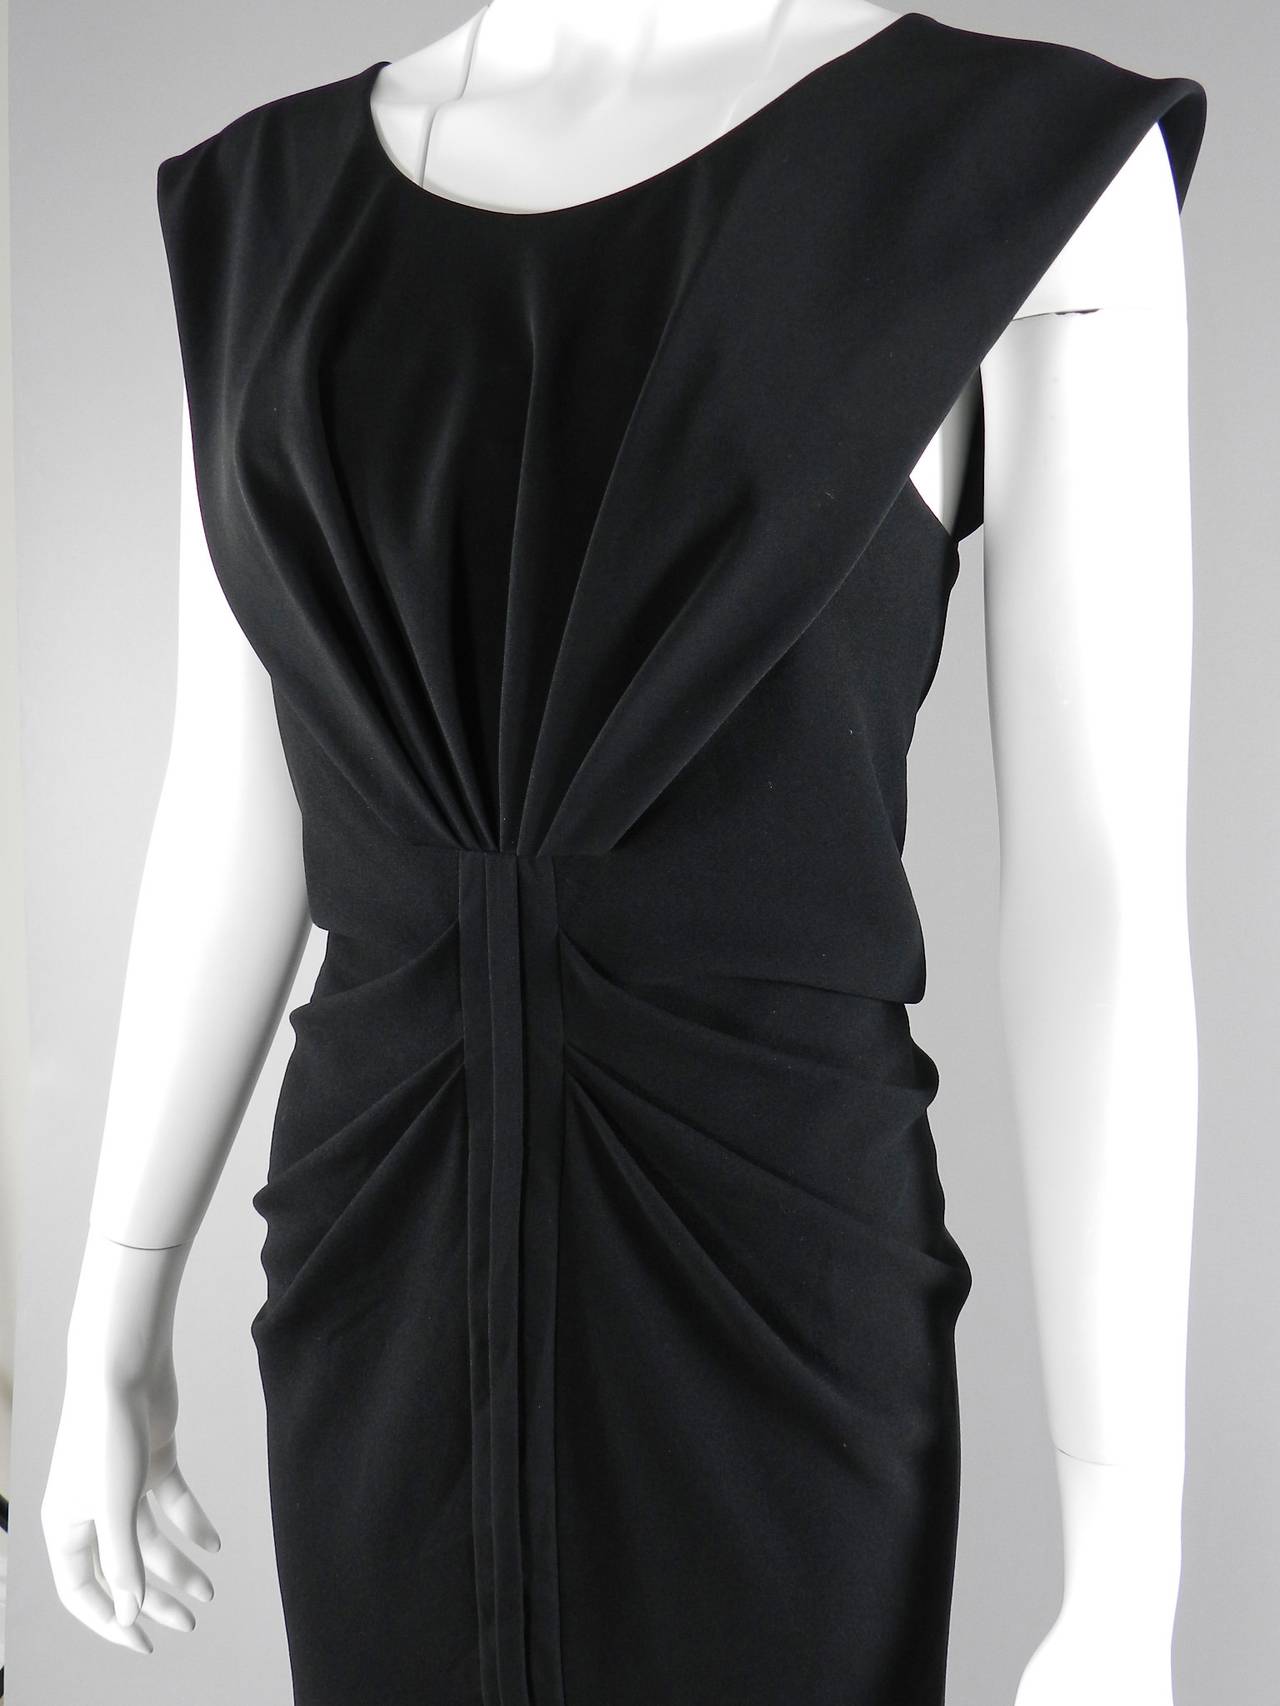 Balenciaga little black dress with shirred front detail. Centre back zipper, excellent condition. Tagged size FR 38 (USA 6). To fit 34